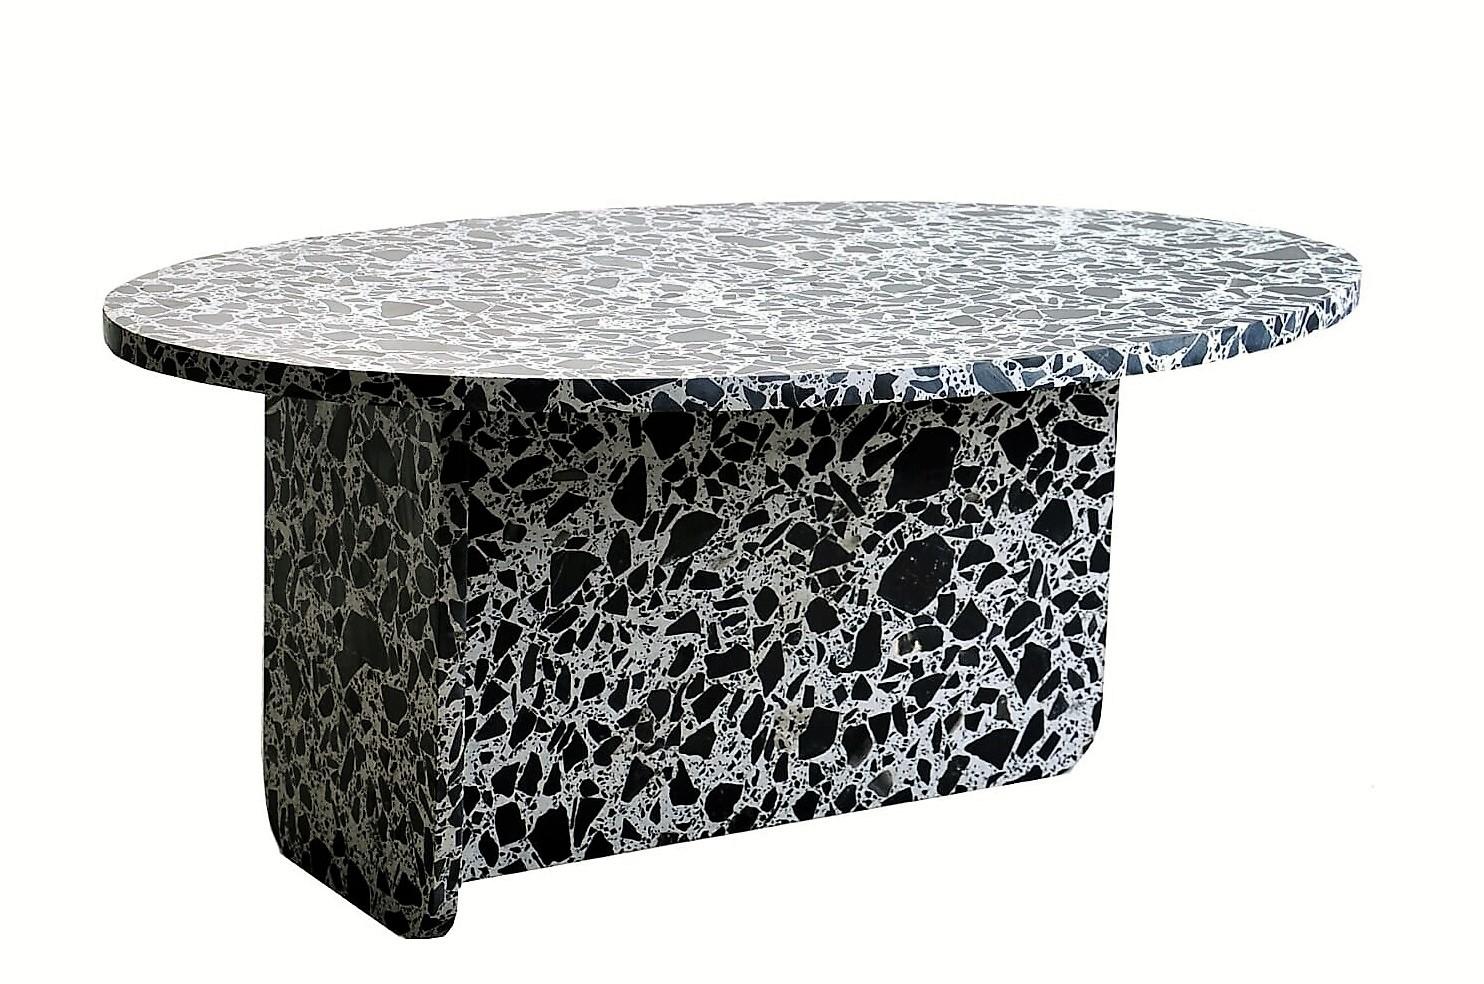 The natural terrazzo nesting tables are perfect for smaller outdoor spaces where an extra table can come in handy. Use one as a side table, or as a coffee table in the living room. The tables are crafted entirely of polished Italian terrazzo with